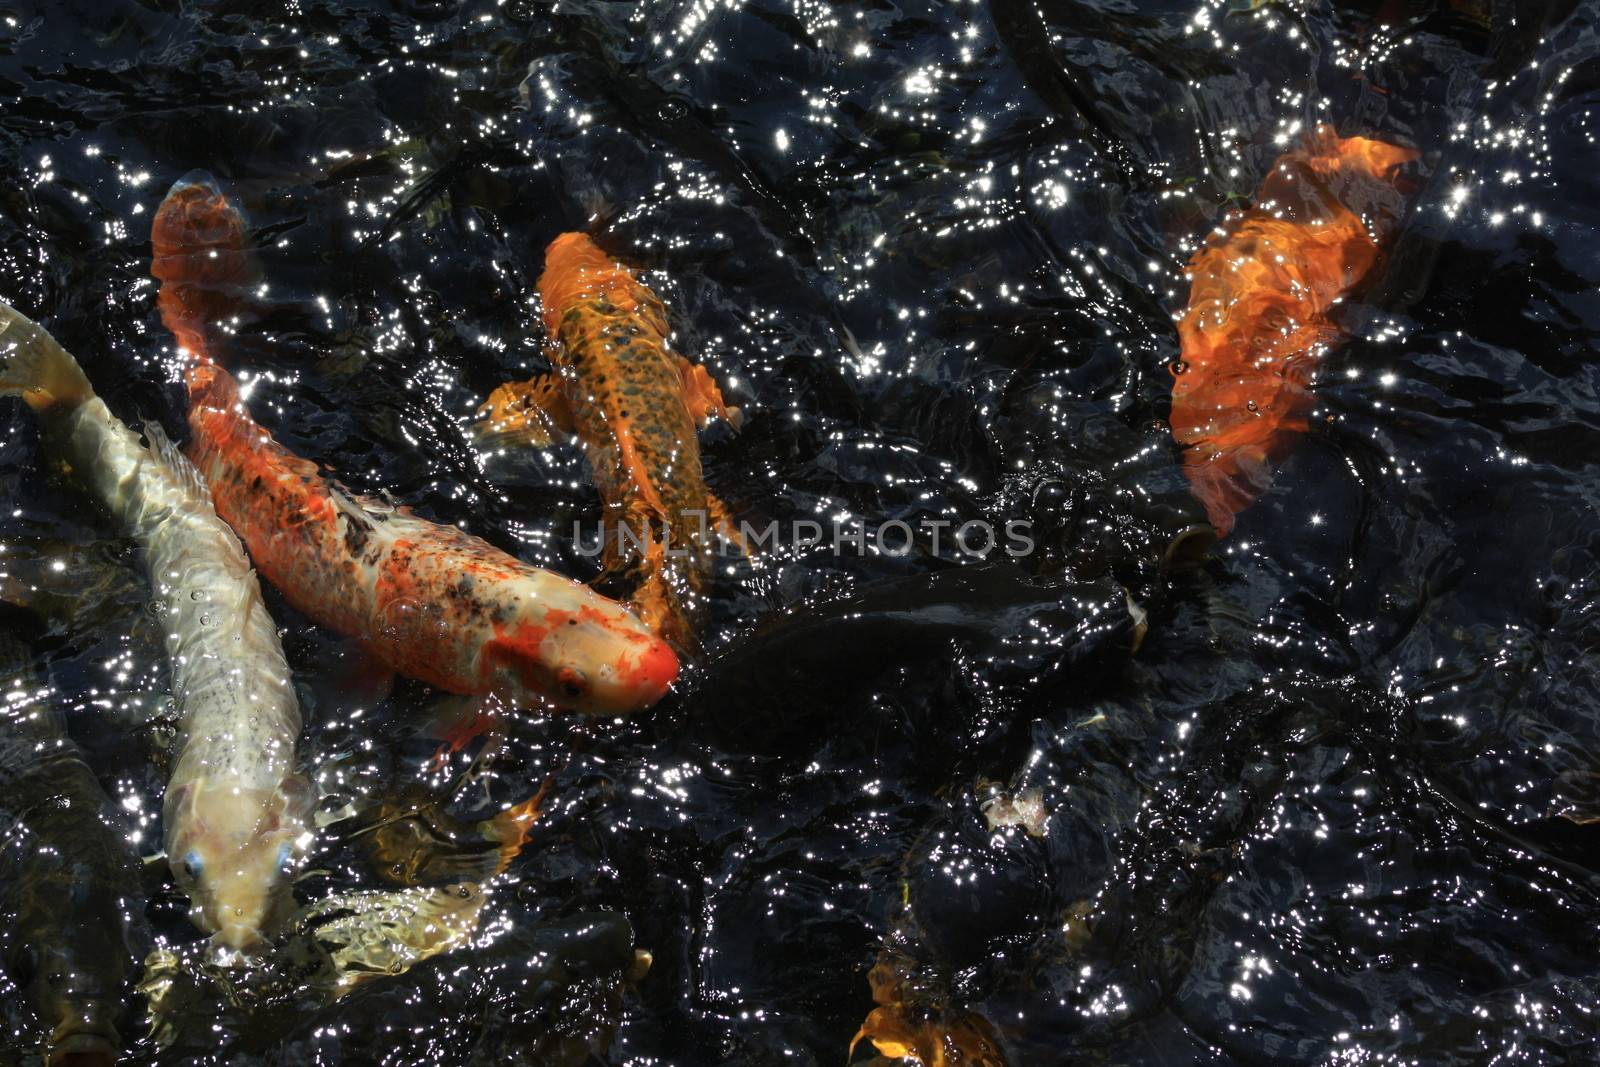 Colorful Koi Feed at the Top of a Pond by tornado98